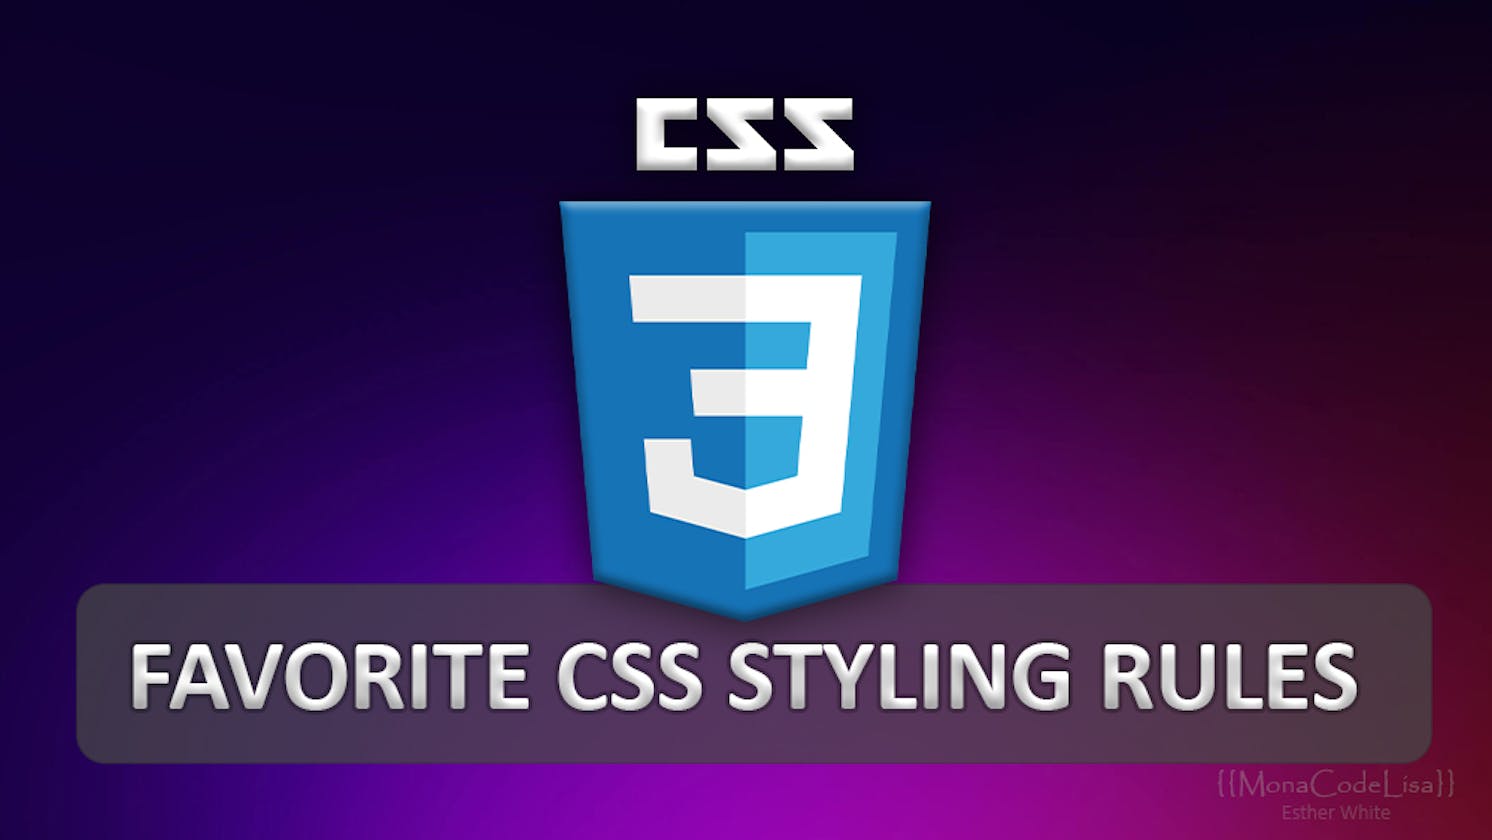 Some of my Favorite CSS Styling Rules